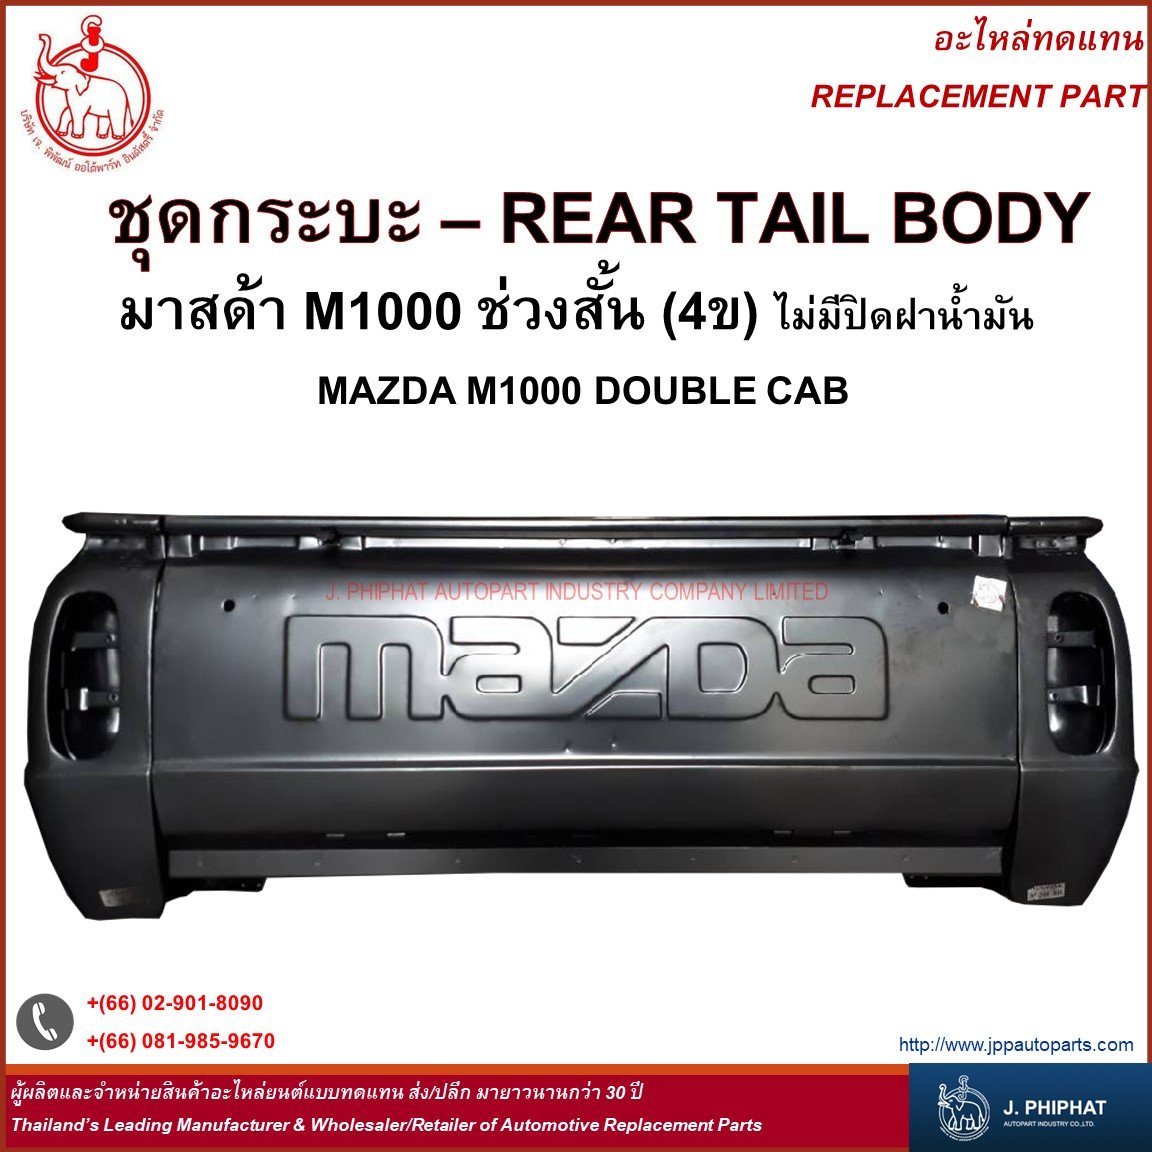 Rear Tail Body - Mazda M1000 Double CAB